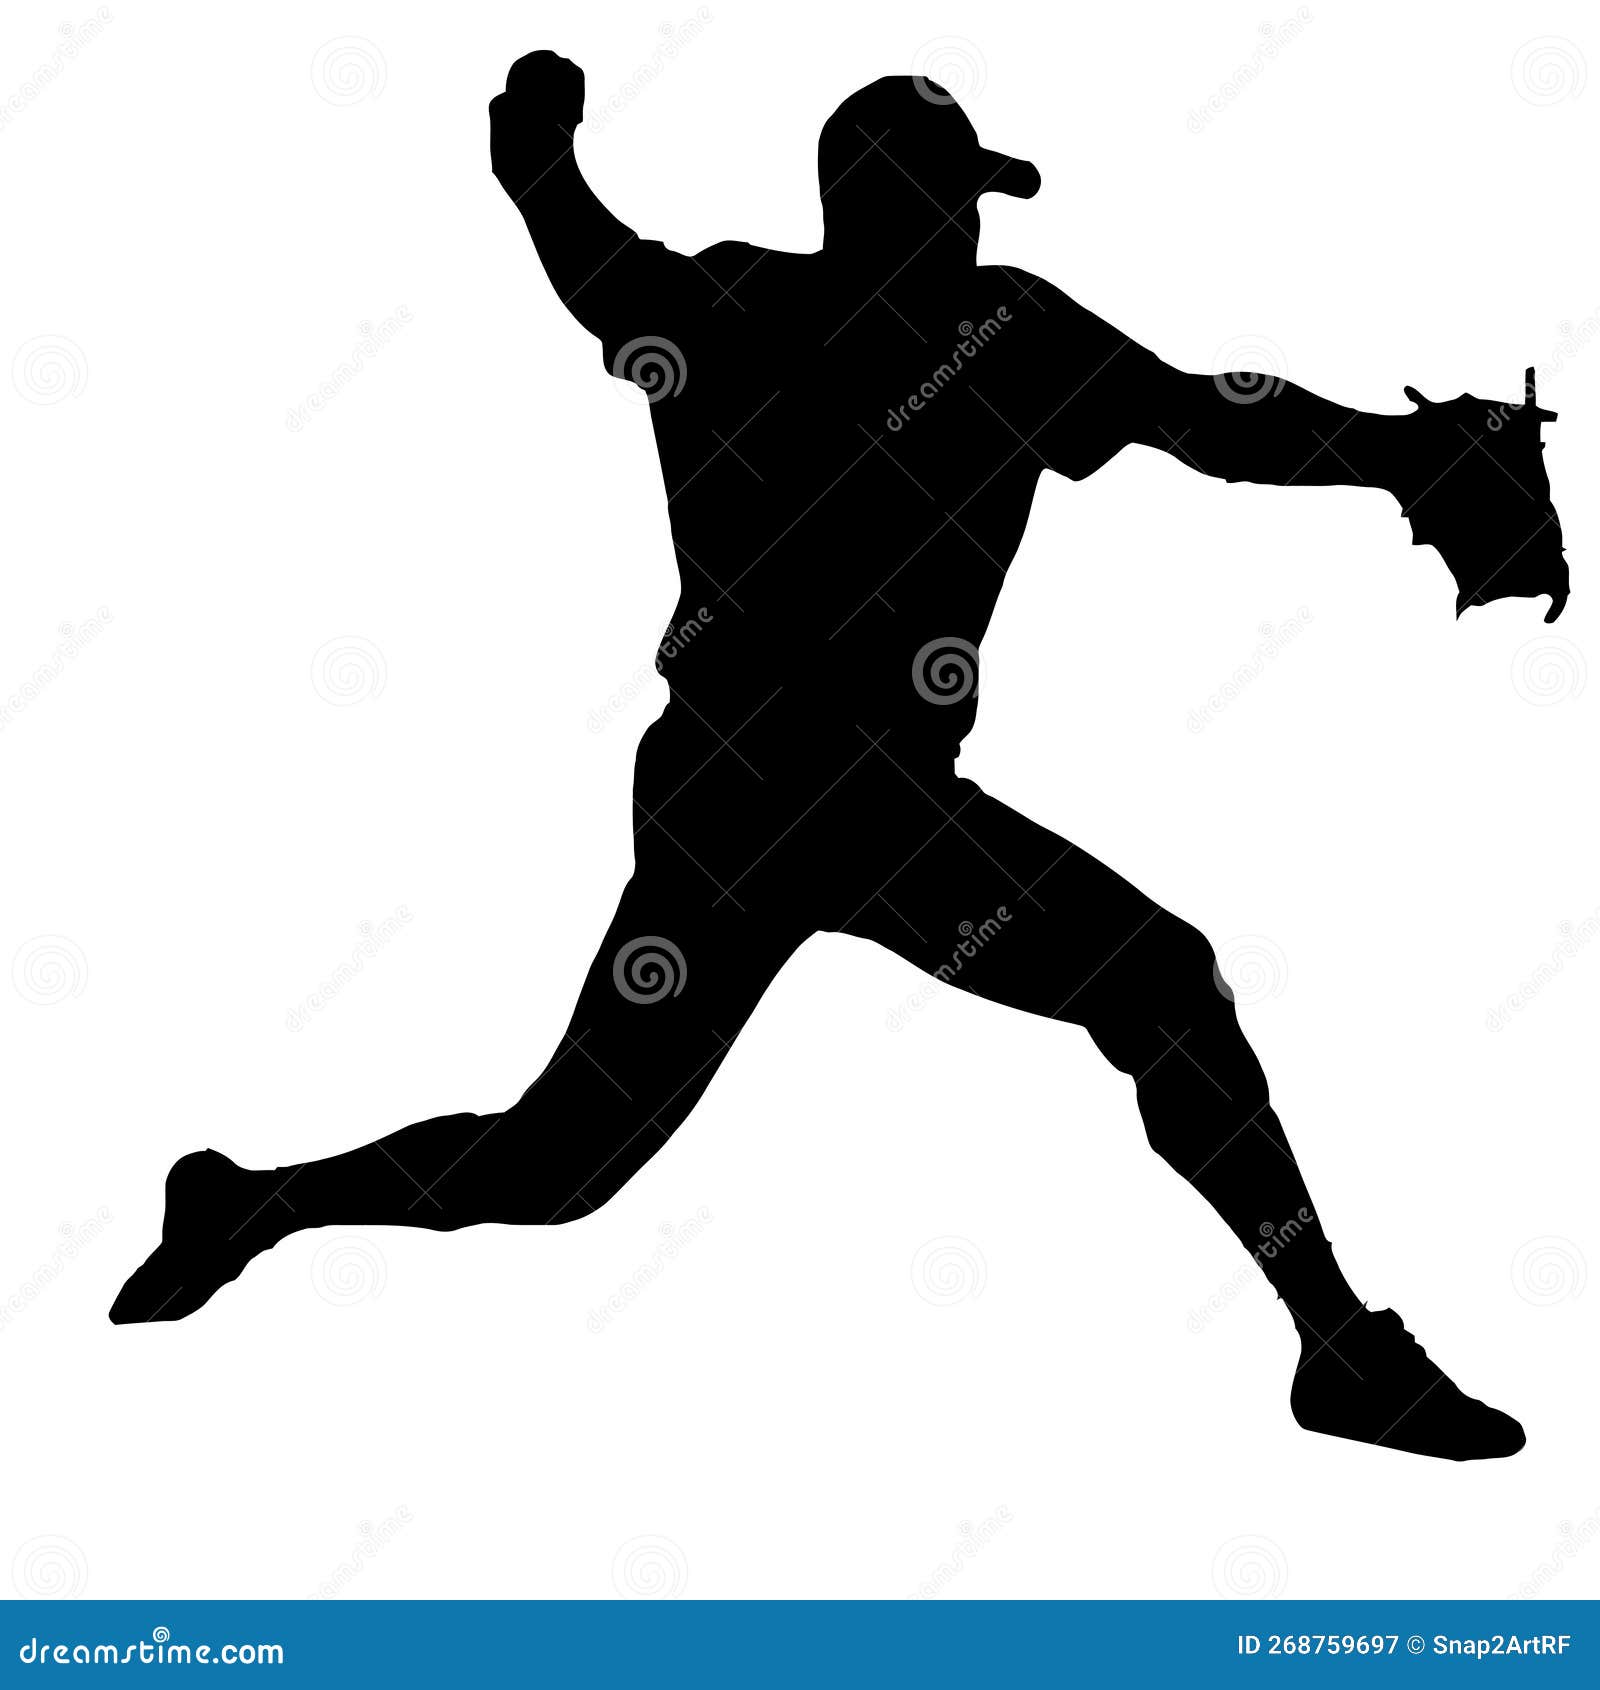 Silhouette of Baseball Pitcher Throwing Ball, Originating Image from ...